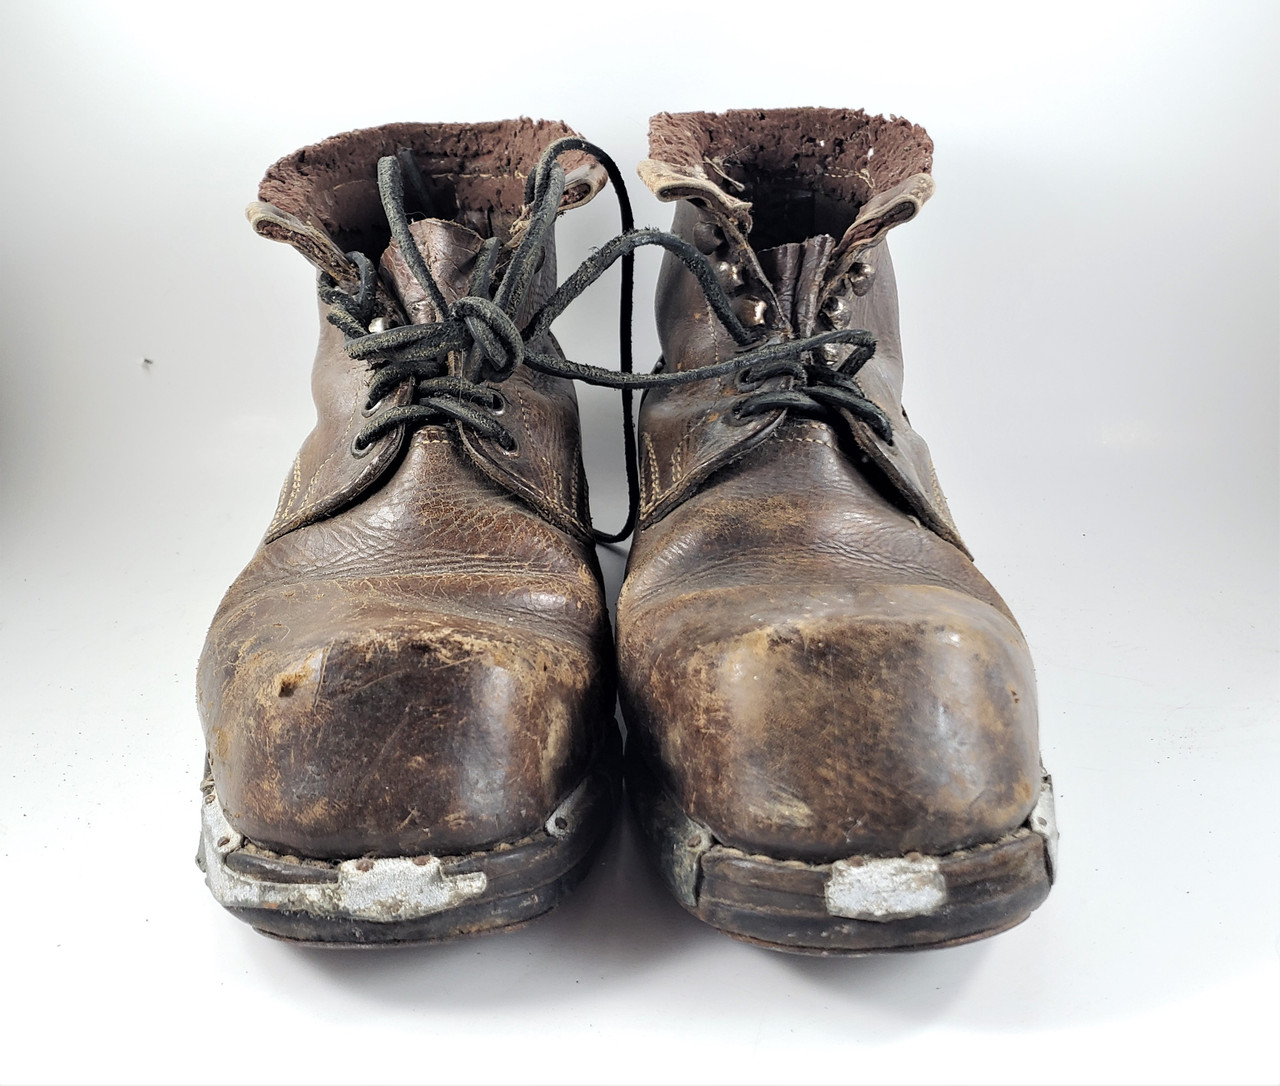 Unidentified Wartime Boots